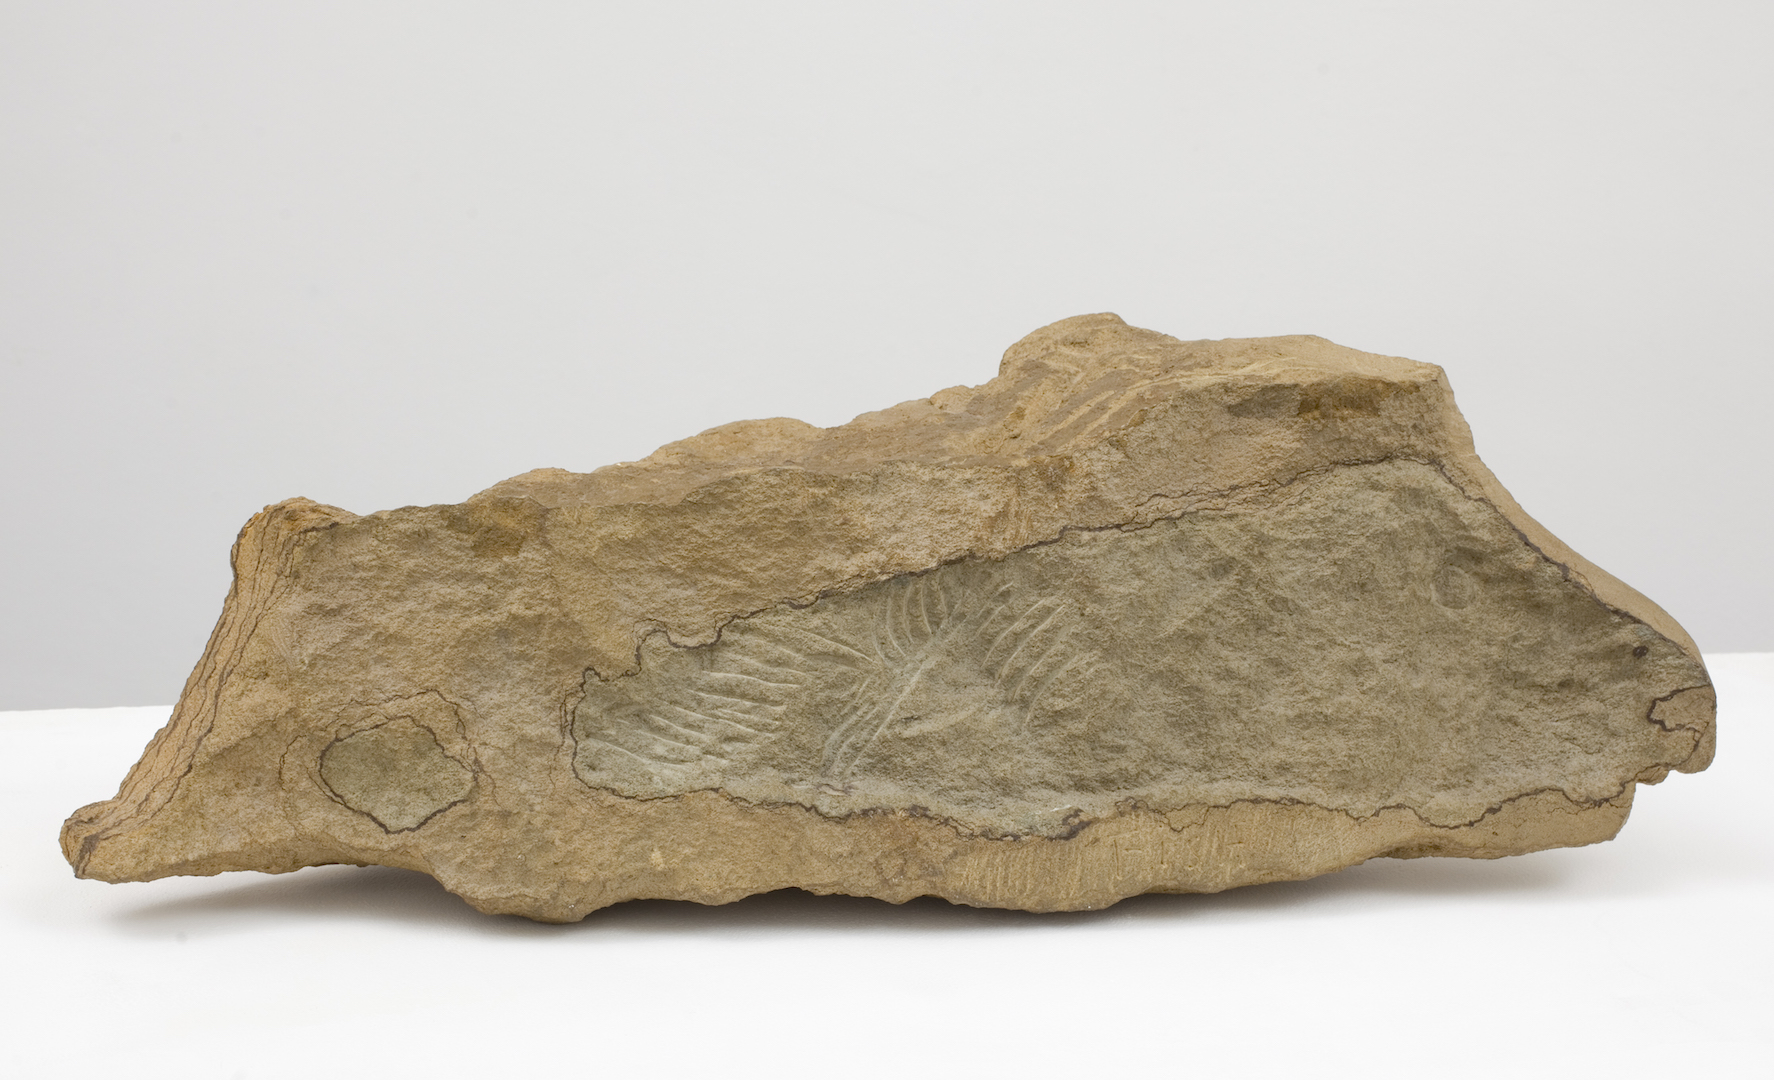  Barry Flanagan,  Lamb/Fish , 1975, Hornton stone on a wooden base, 26 x 63.5 x 14 cm. (including the wooden base), Signed with the artist's initial 'f' (on the top of the stone); incised 'FISH' (on the side) 